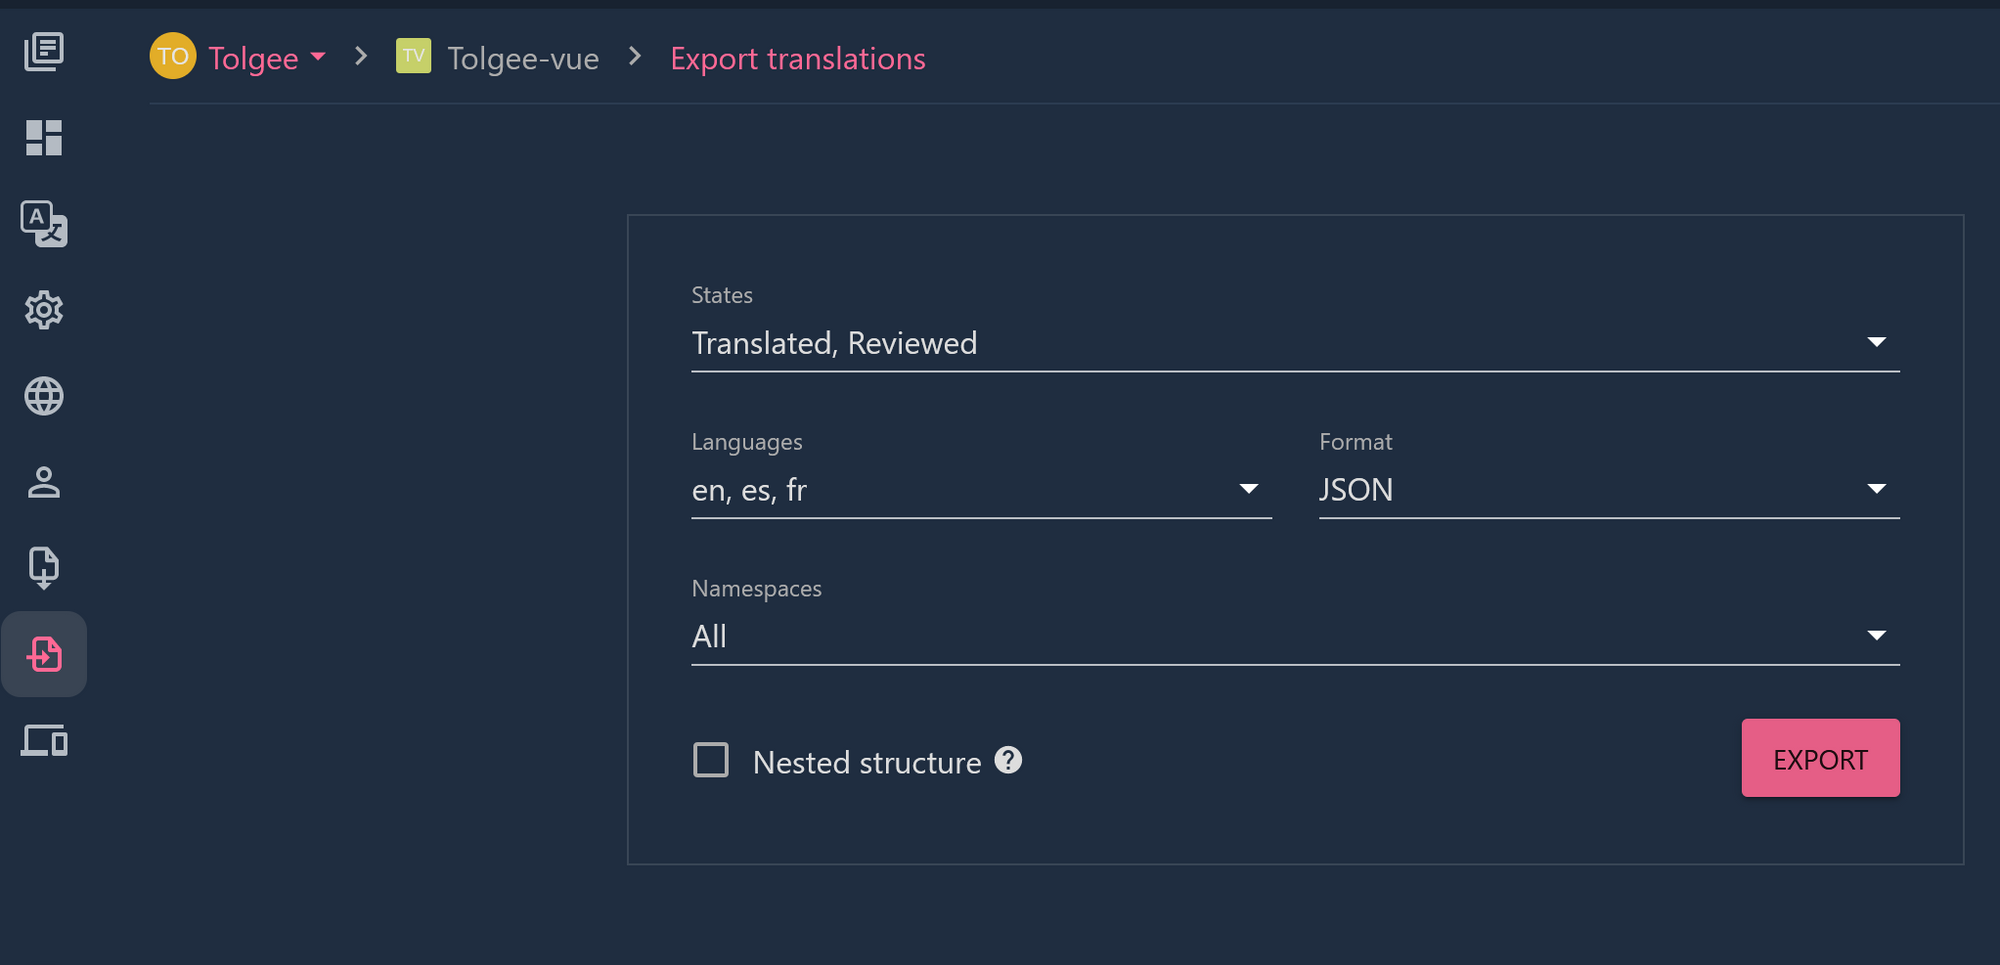 Export translations from Tolgee